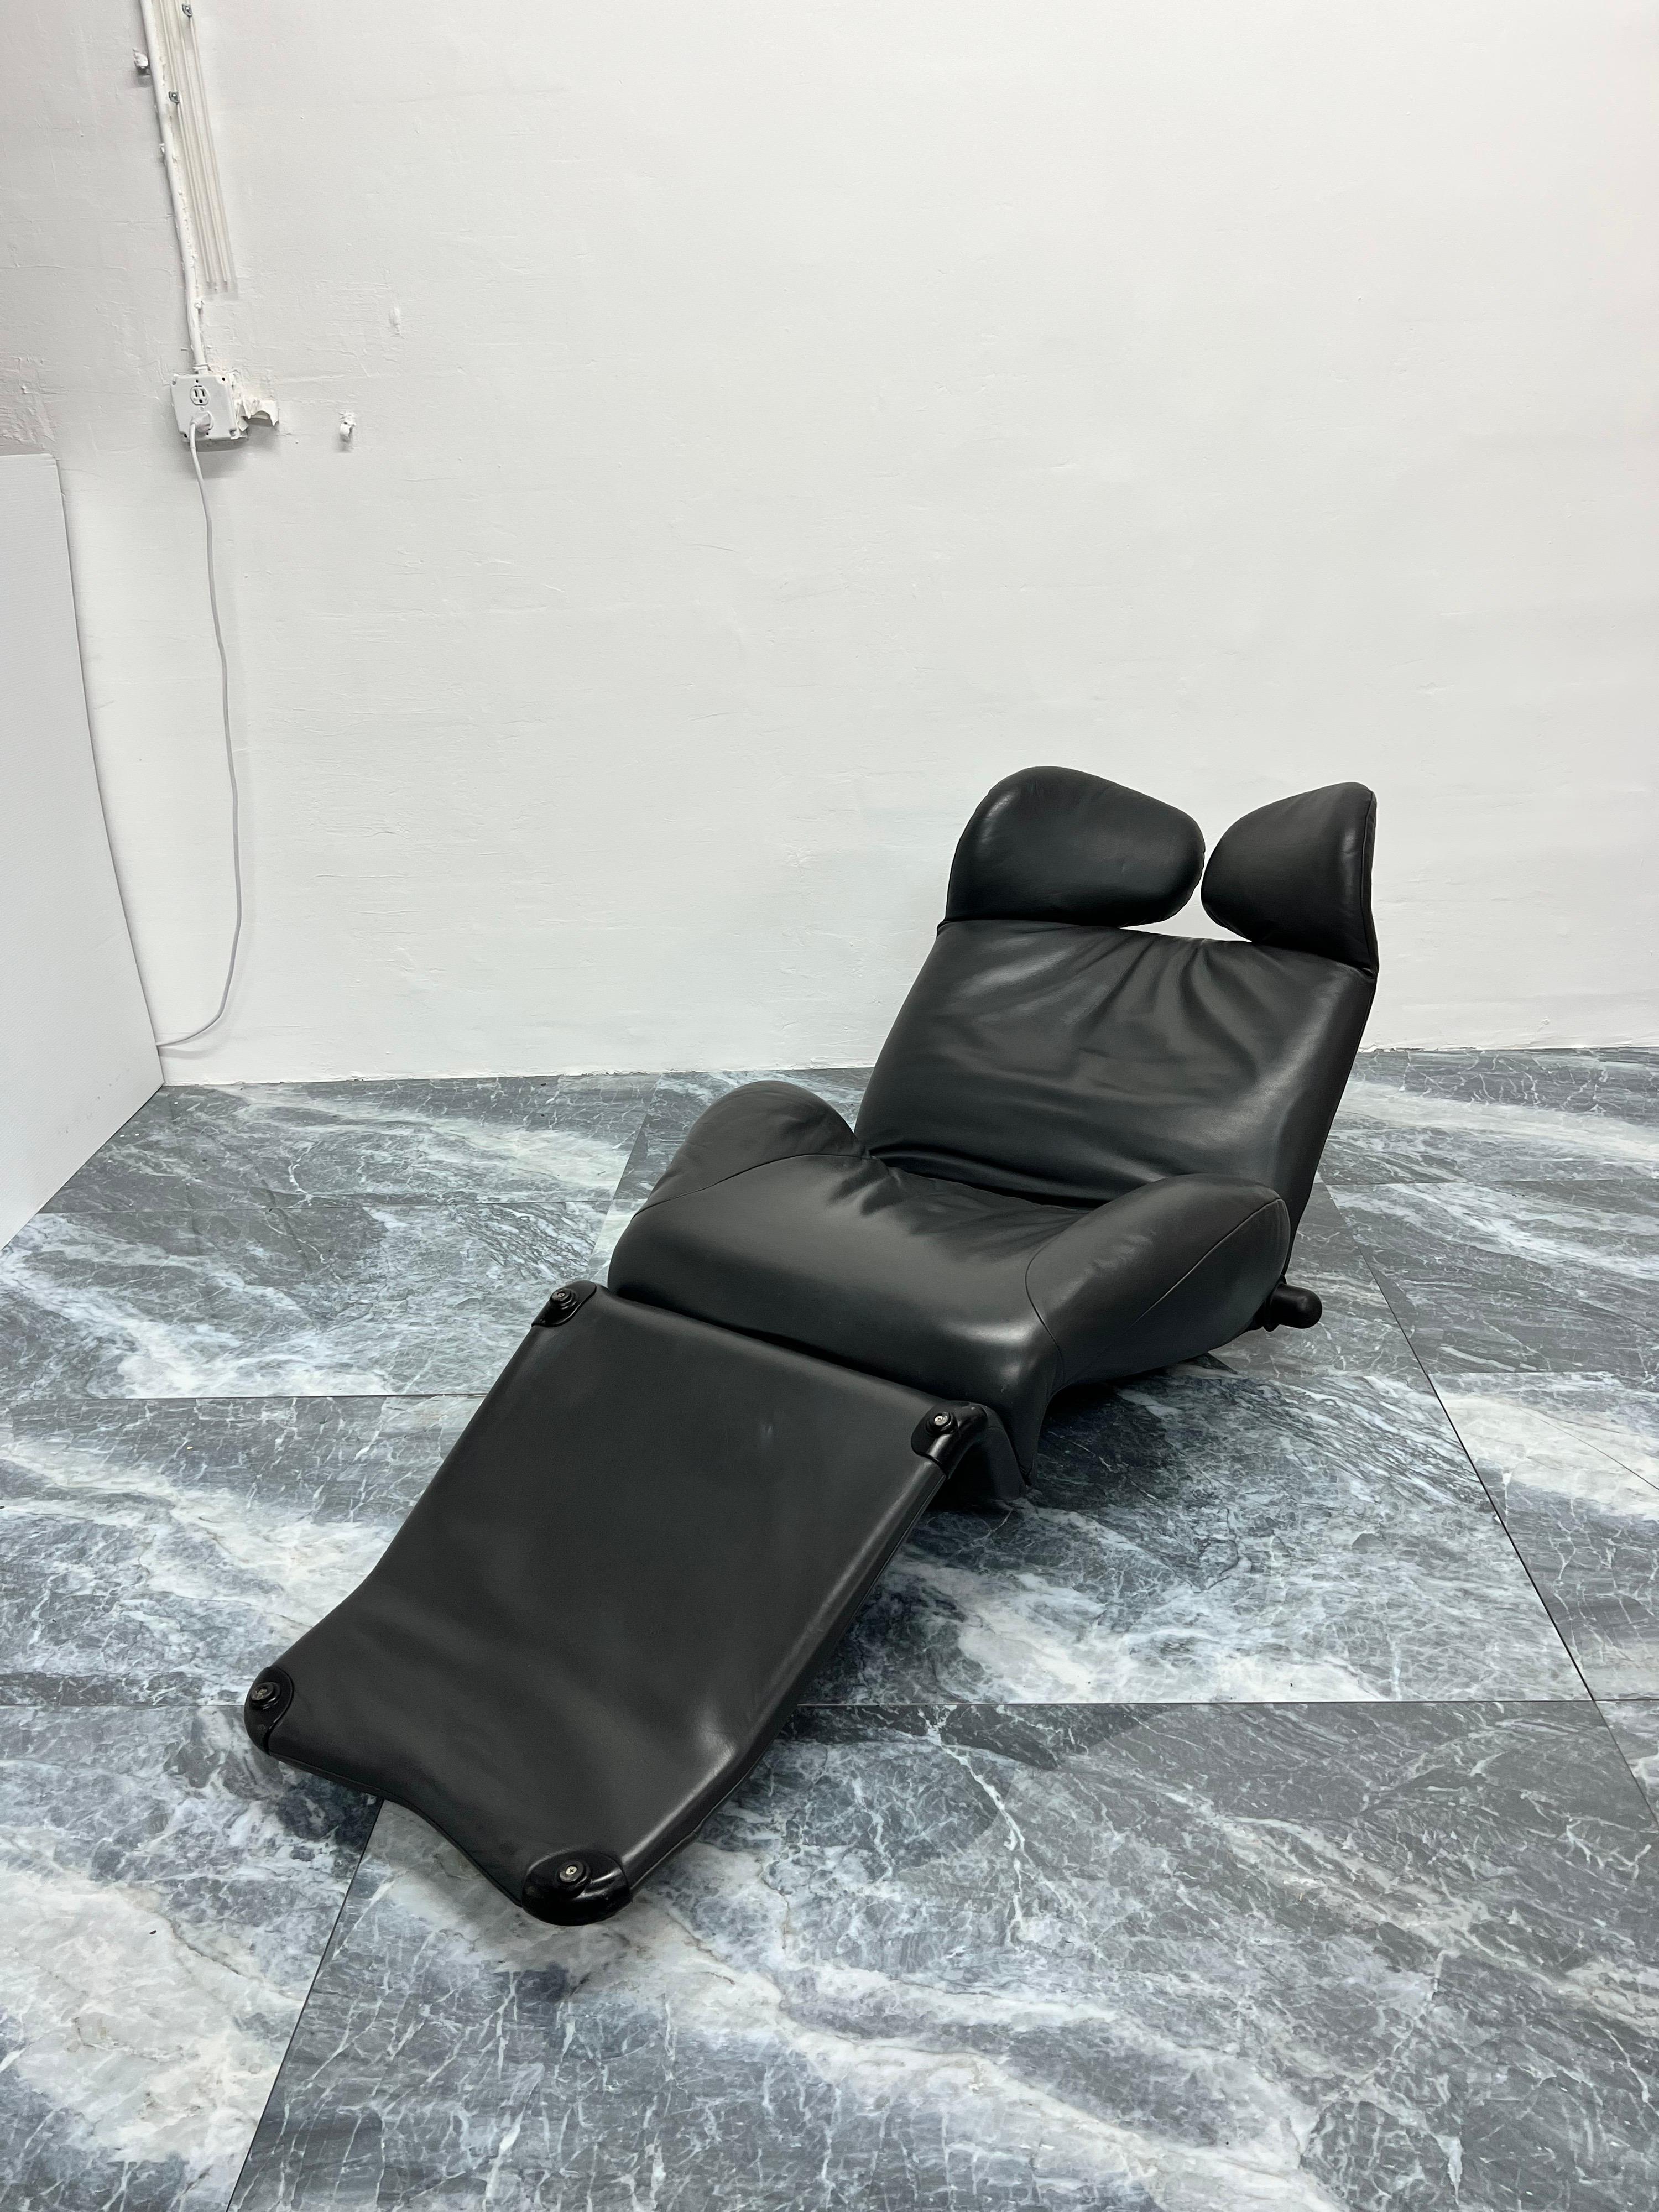 Toshiyuki Kita Wink Charcoal Gray Leather Lounge Chair for Cassina, 1980s For Sale 1